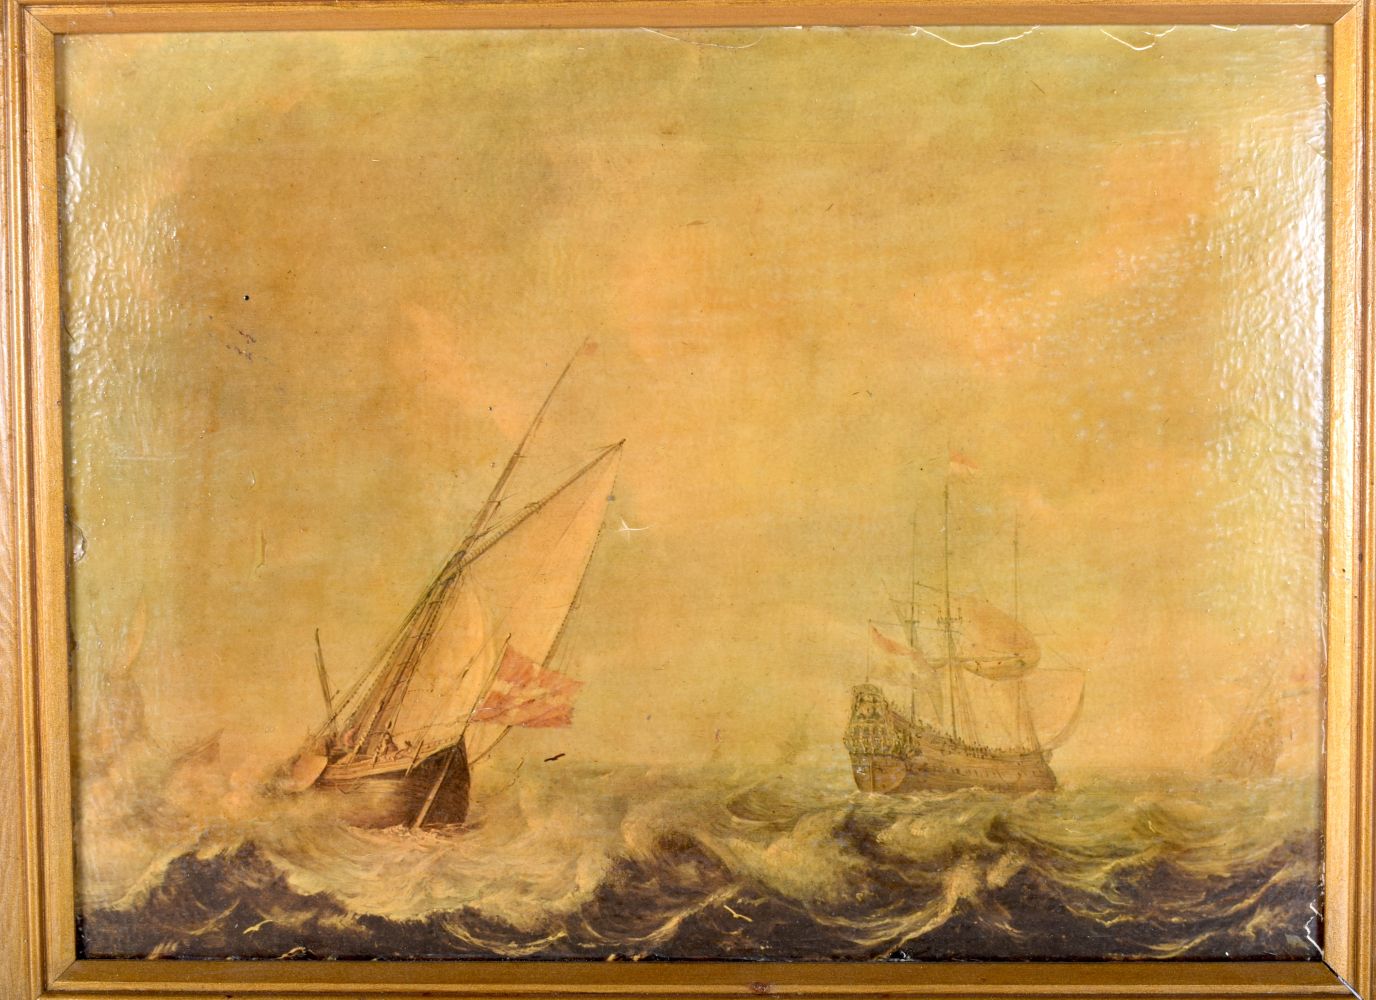 A framed 19th century oil on canvas of sailing ships in rough seas 28 .5 x 39 cm. - Image 2 of 3